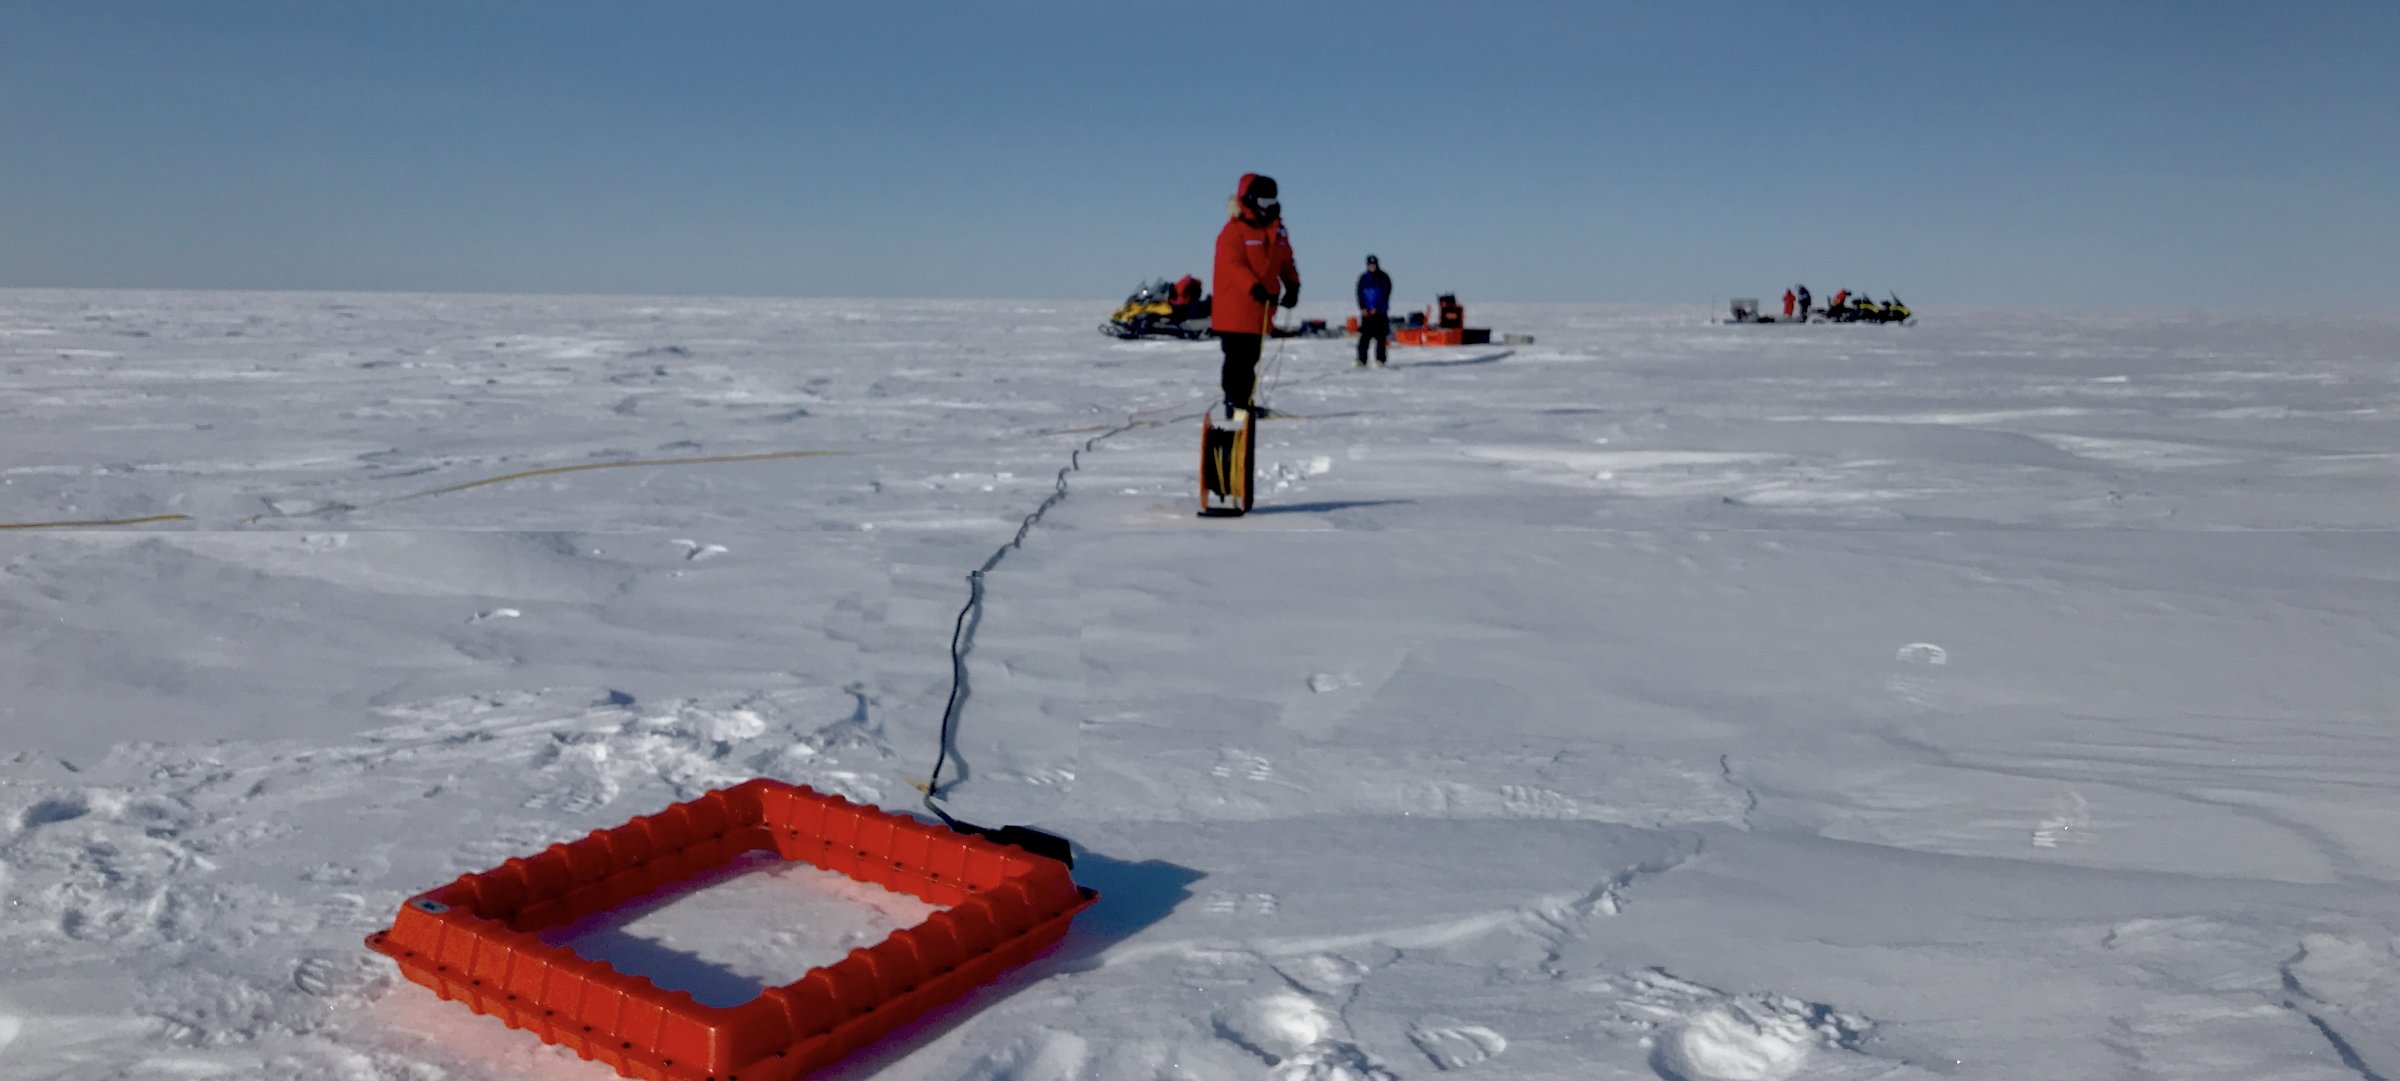 Researchers with geophysics equipment on the ice of Lake Superior.